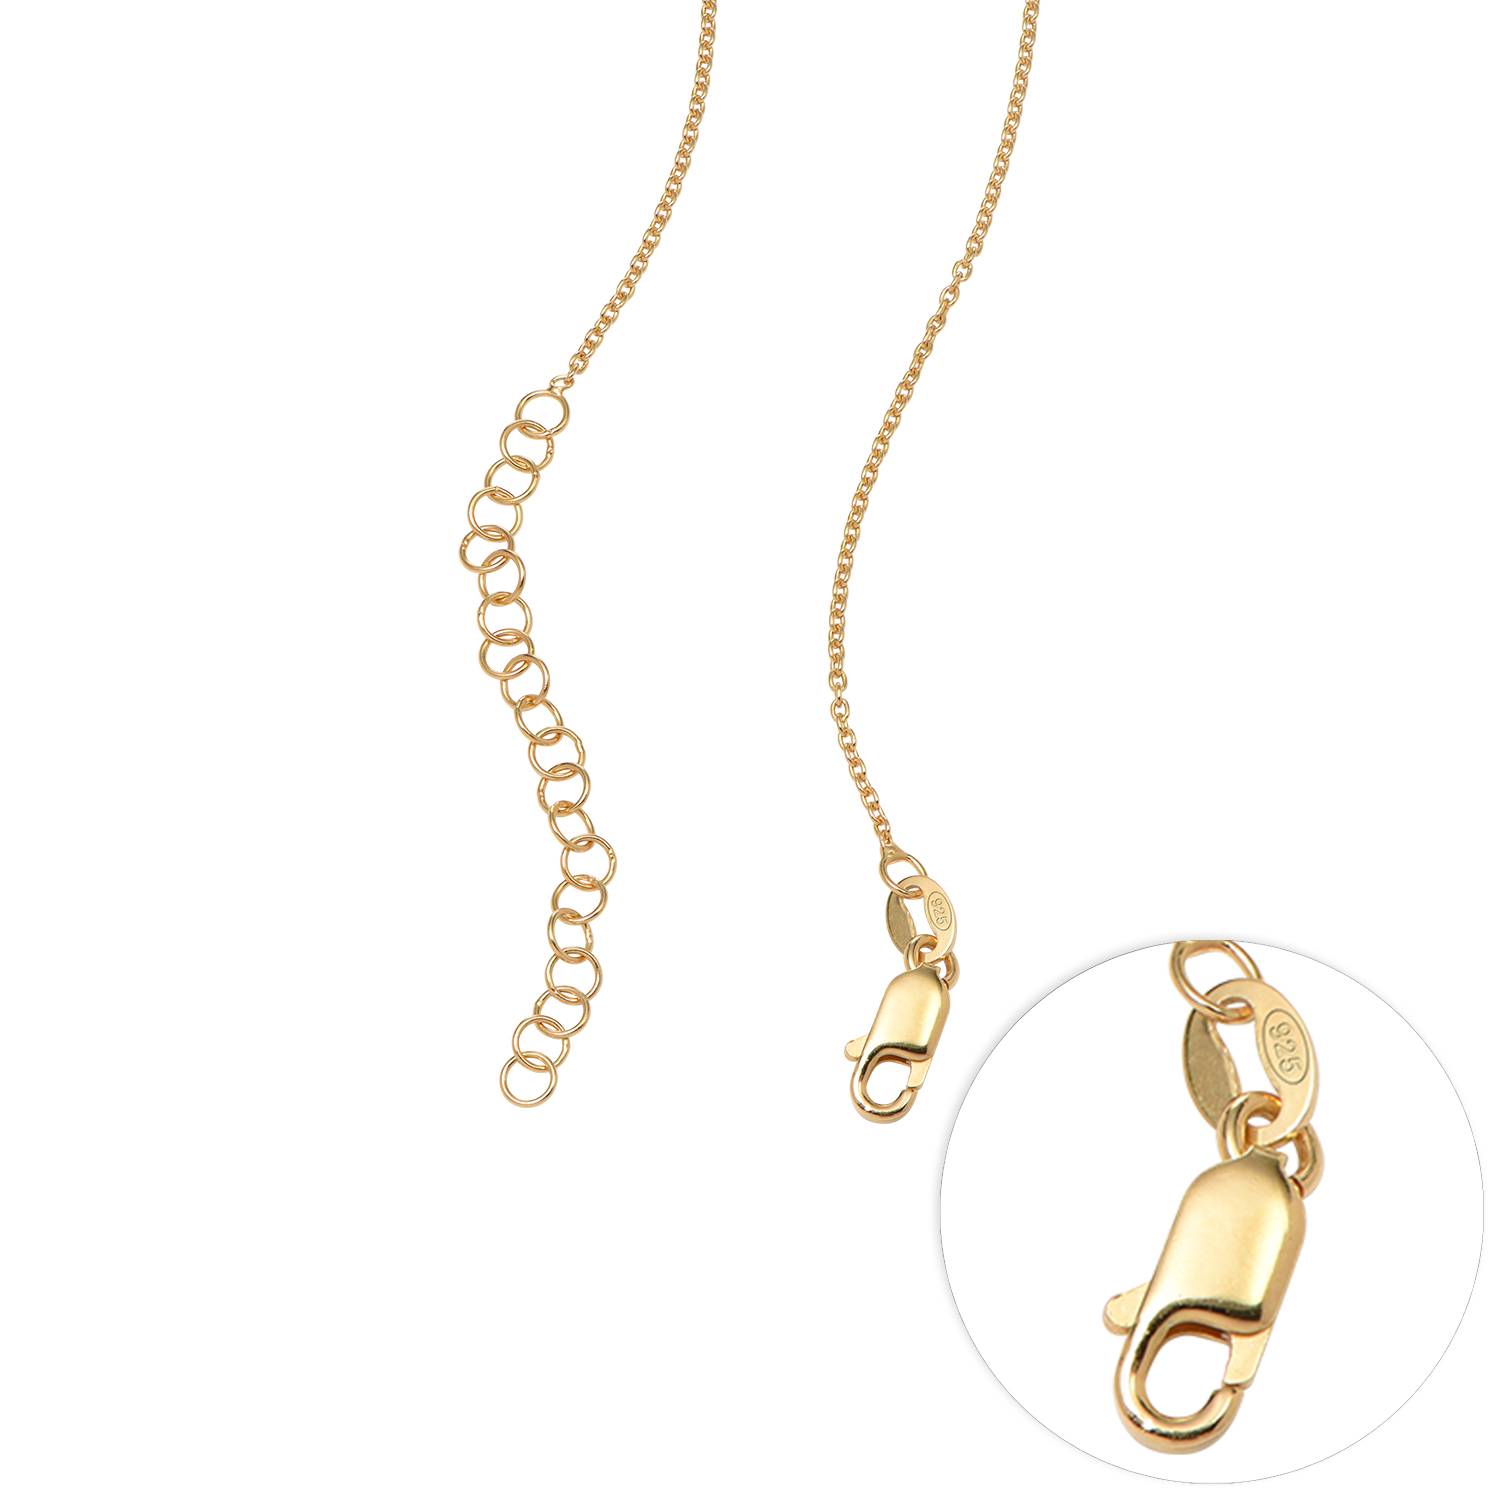 Heart Knot Necklace in 18K Gold Plating-6 product photo